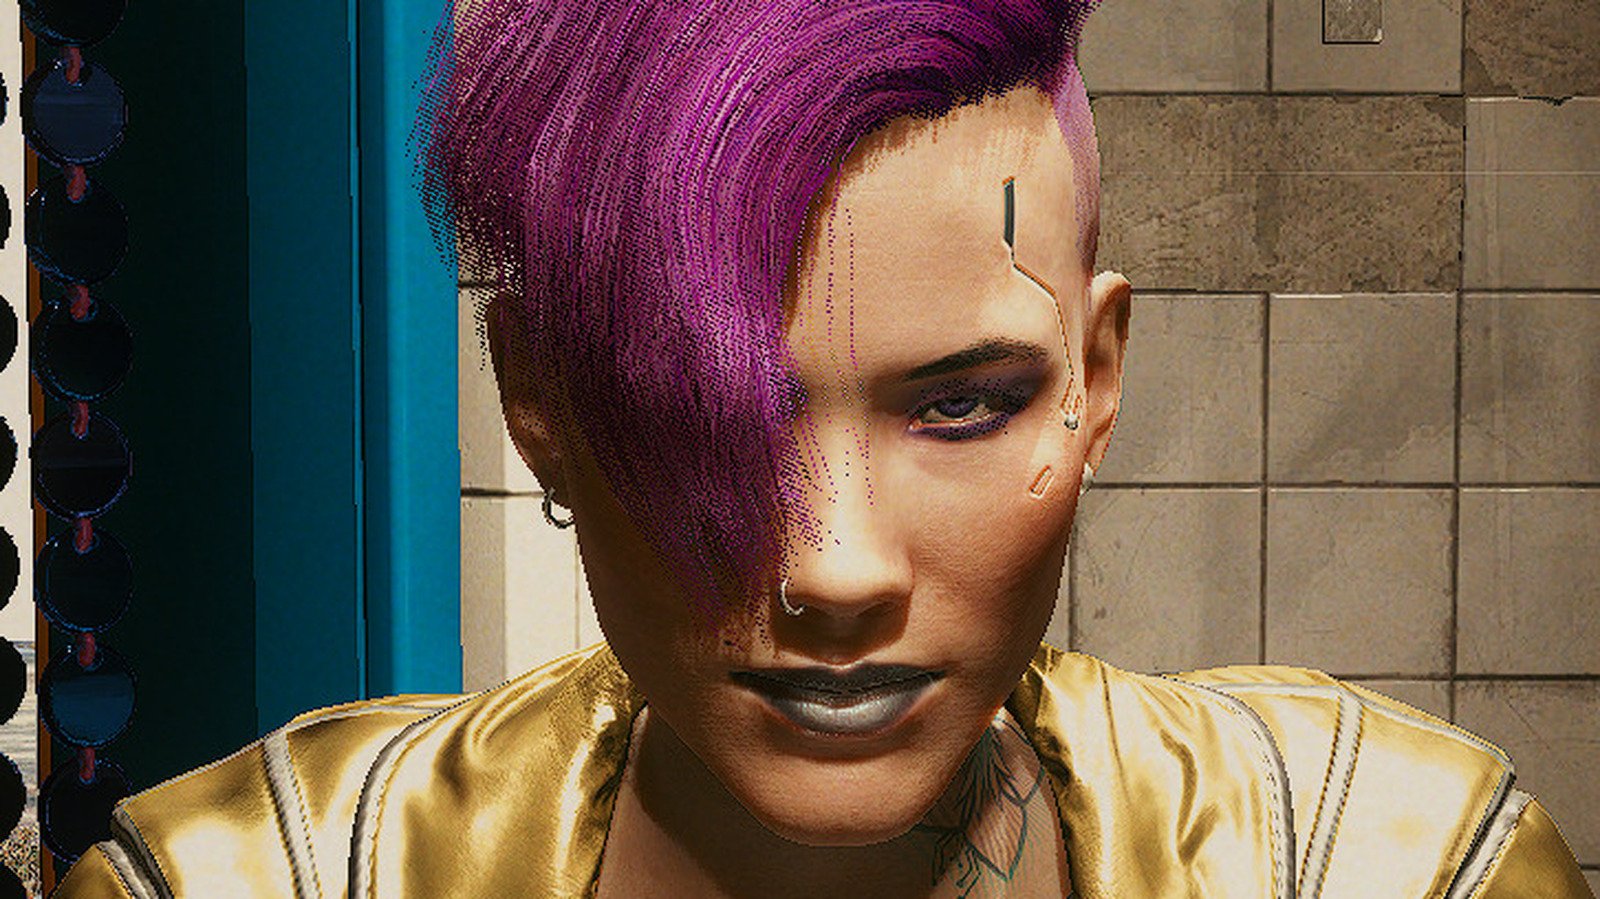 This Cyberpunk 2077 Investor Wants Heads To Roll - SVG